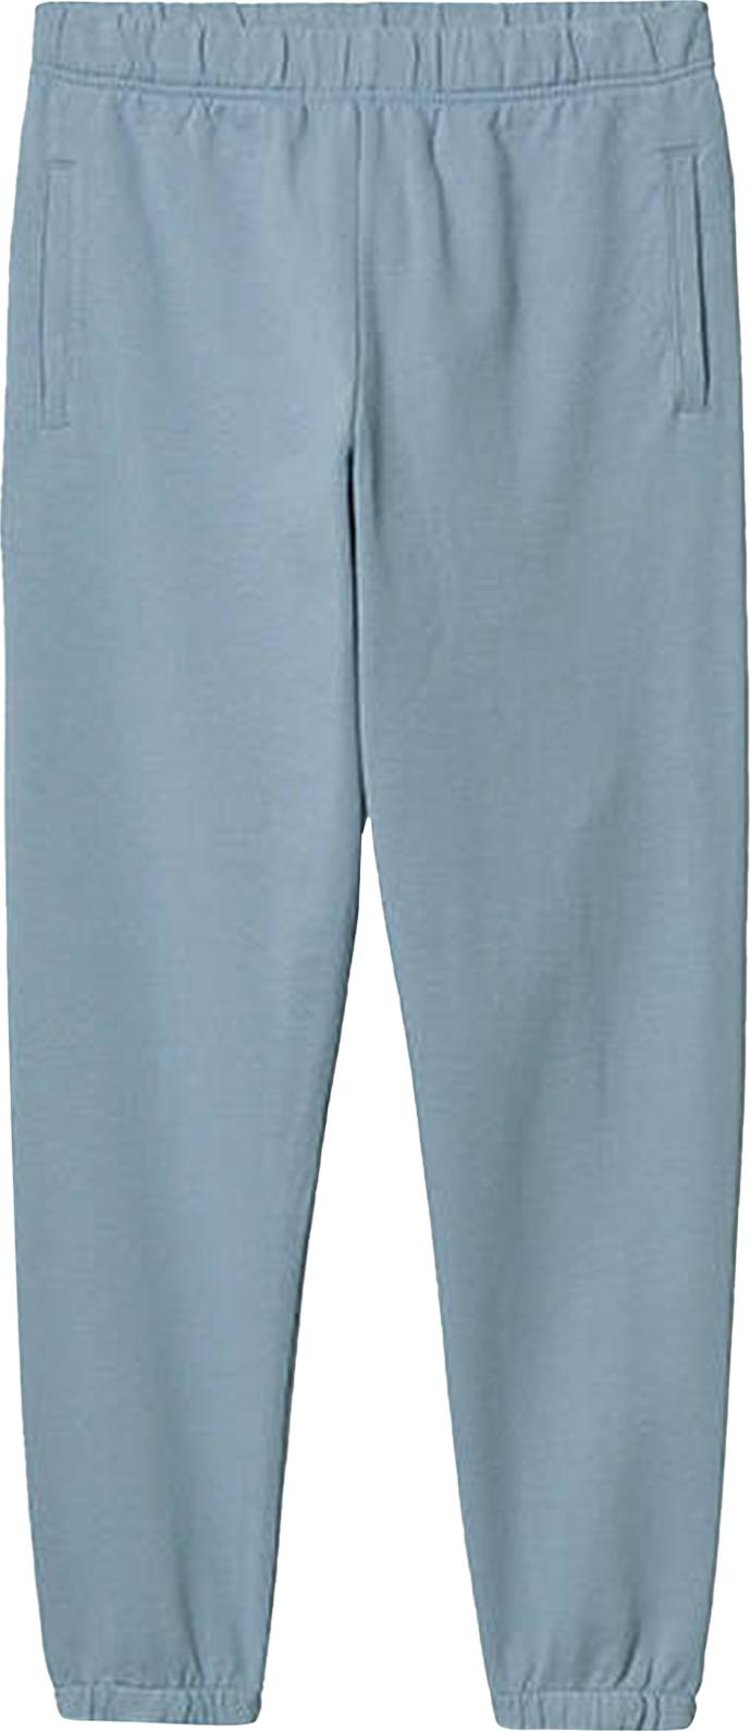 Carhartt WIP Pocket Sweatpants 'Frosted Blue'